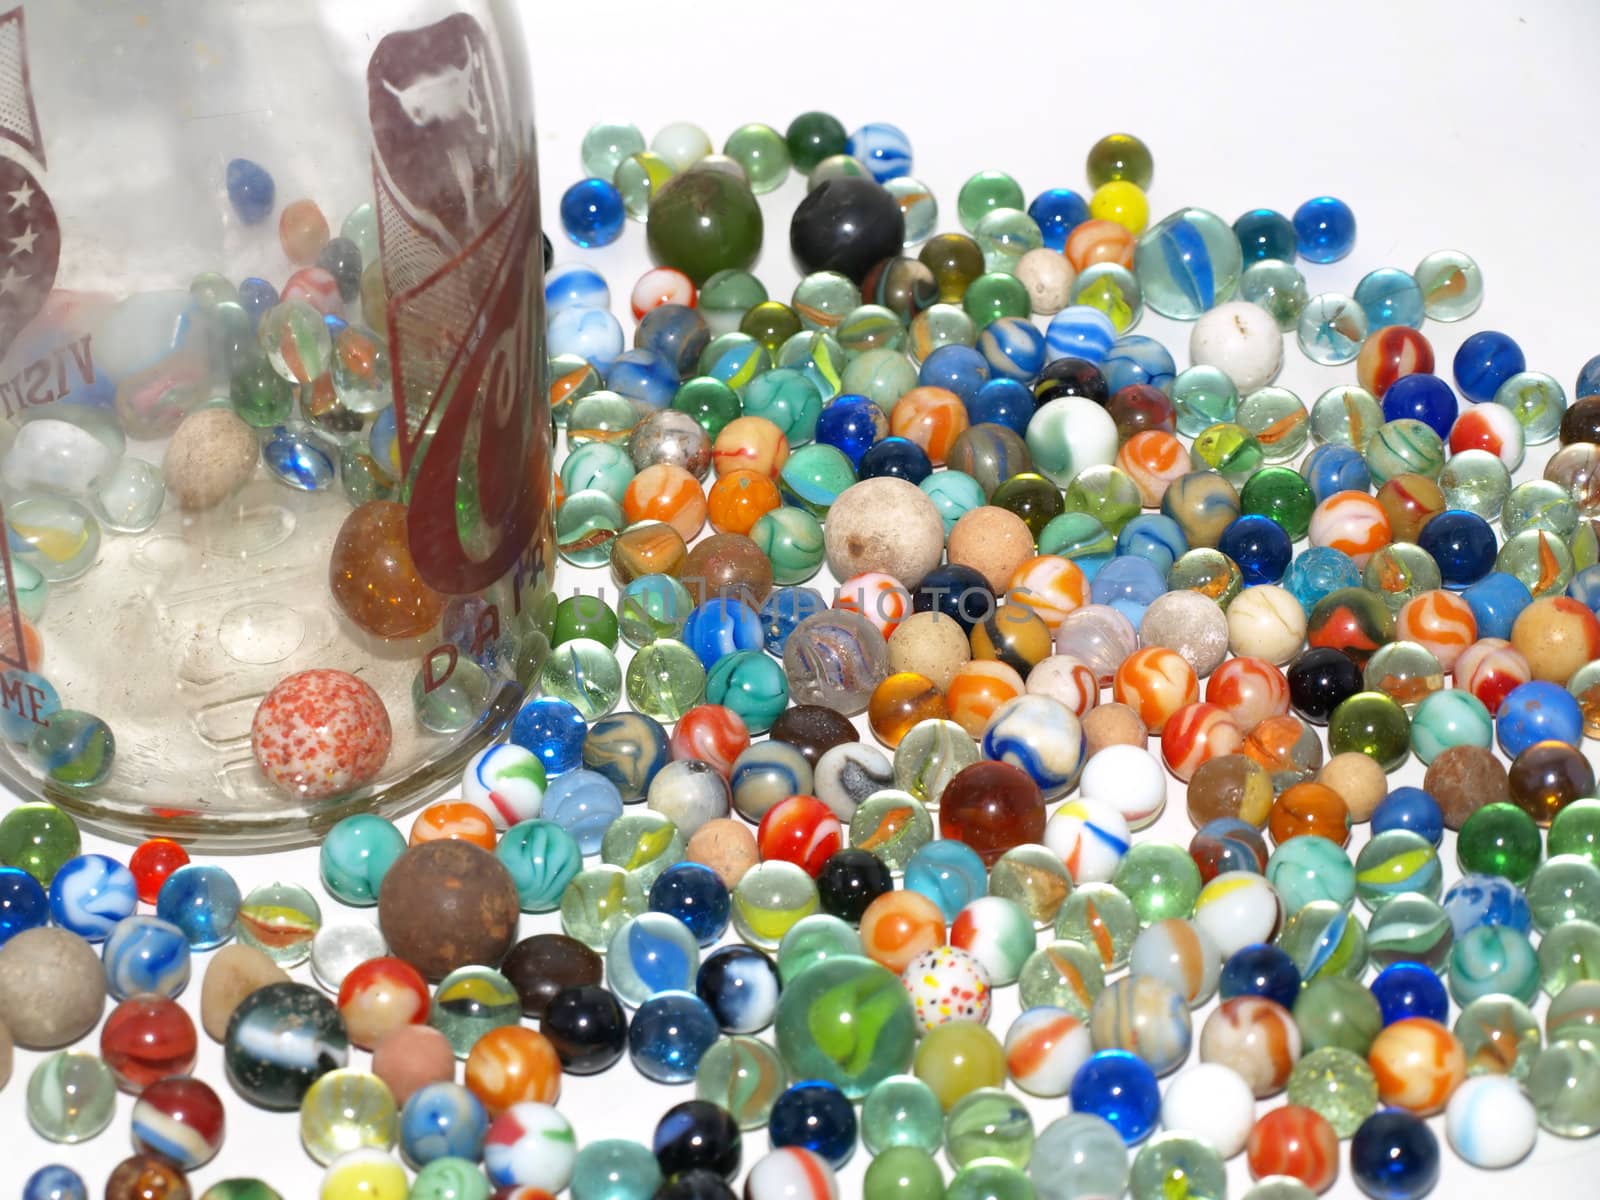 An assortment of various marbles and shooters spilled out next to a glass bottle.